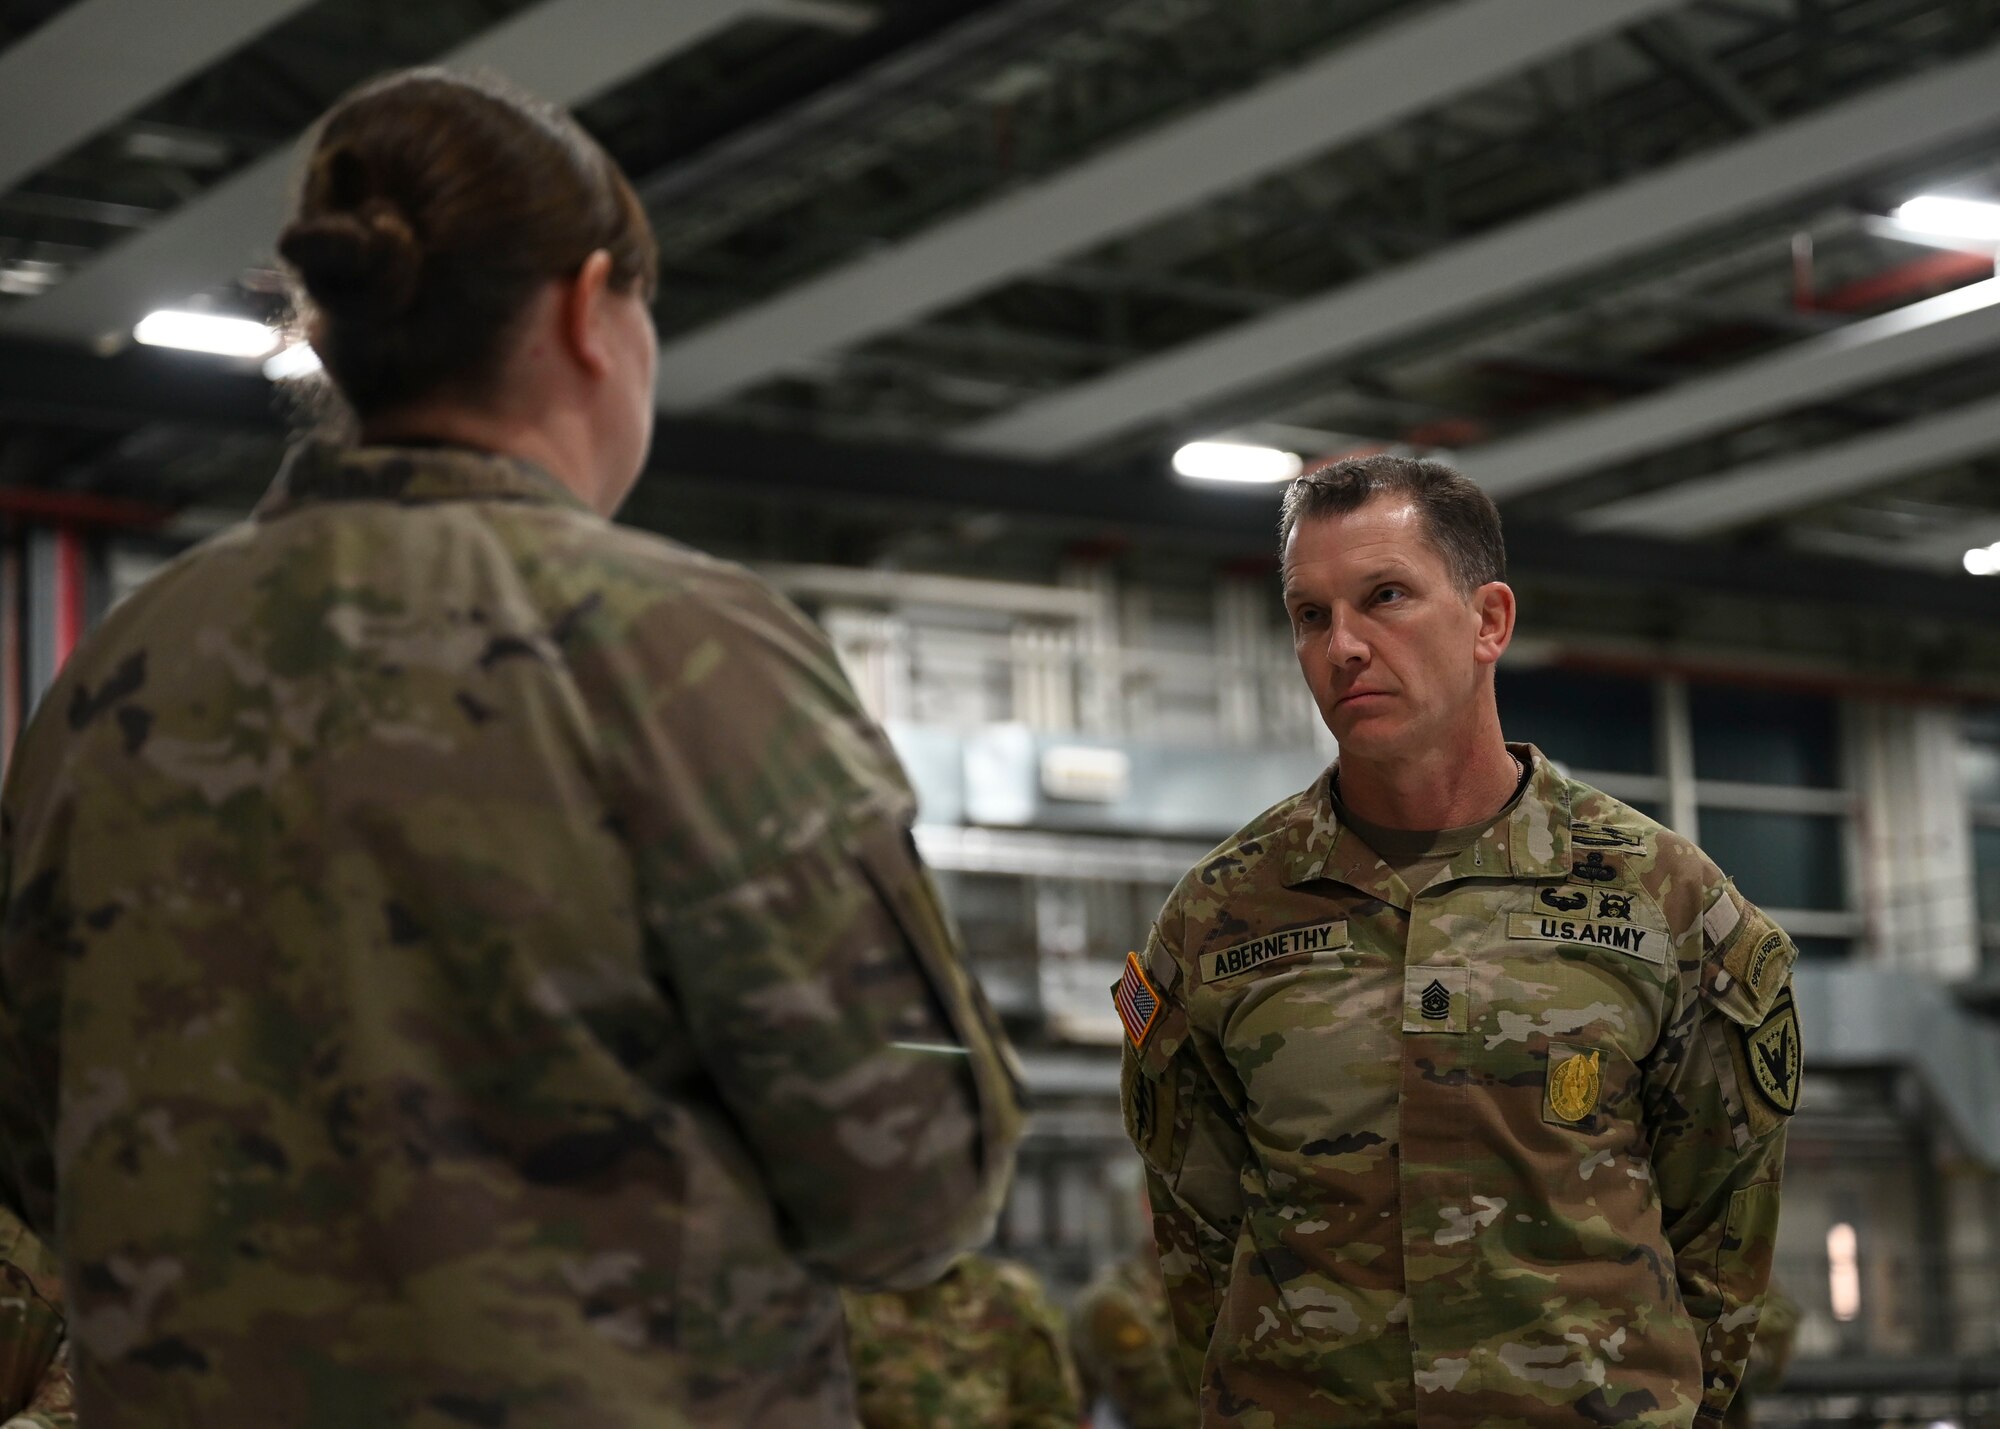 Abernethy was informed on previous 352nd Special Operations Wing training successes in Special Operations Command exercises involving countries all over the European theater.